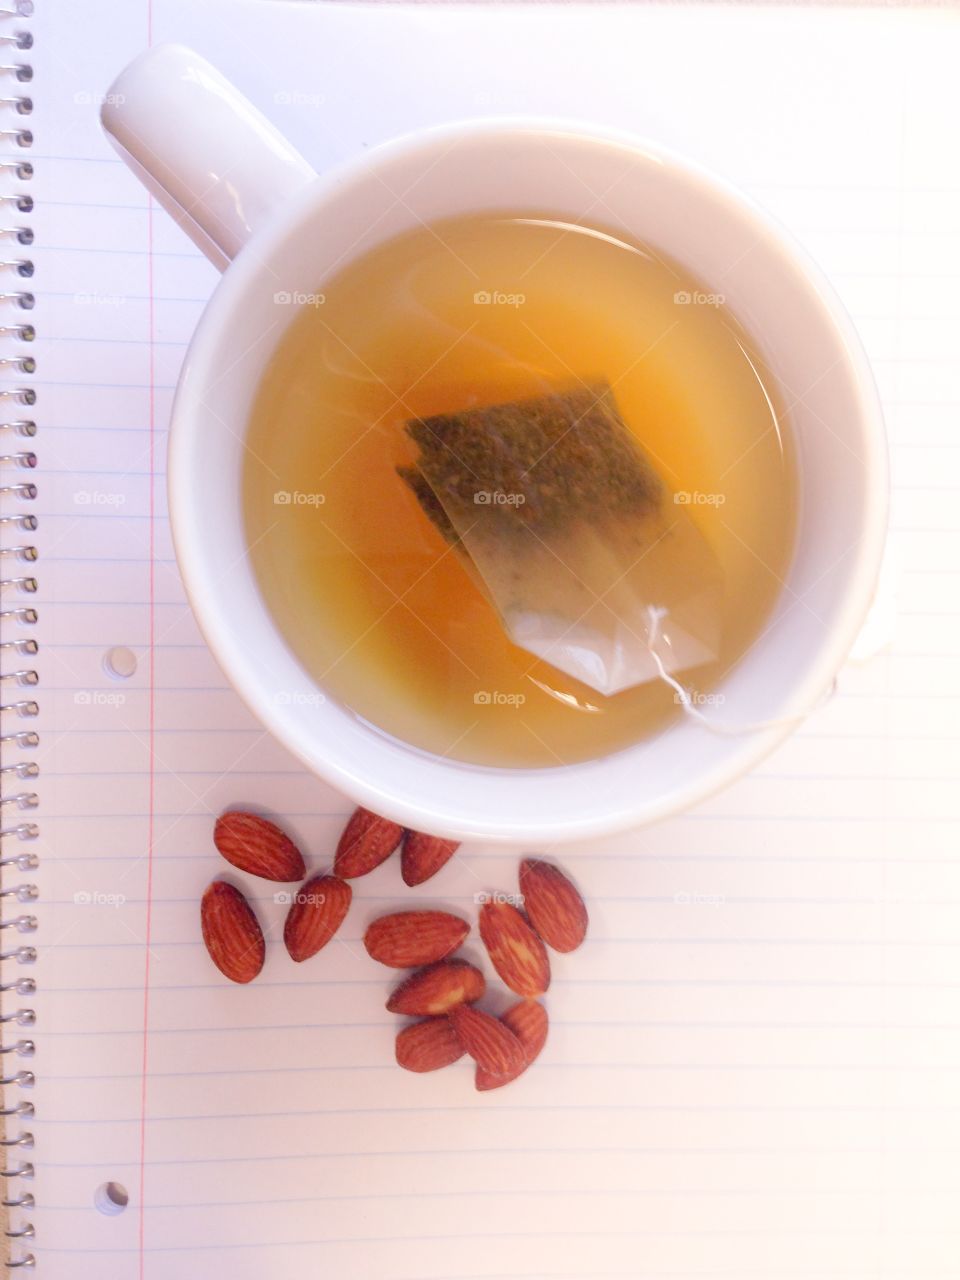 Tea and snack. A cup of tea brewing on a spiral notebook. A handful of almonds sits next to the mug of tea, waiting for an afternoon work break.